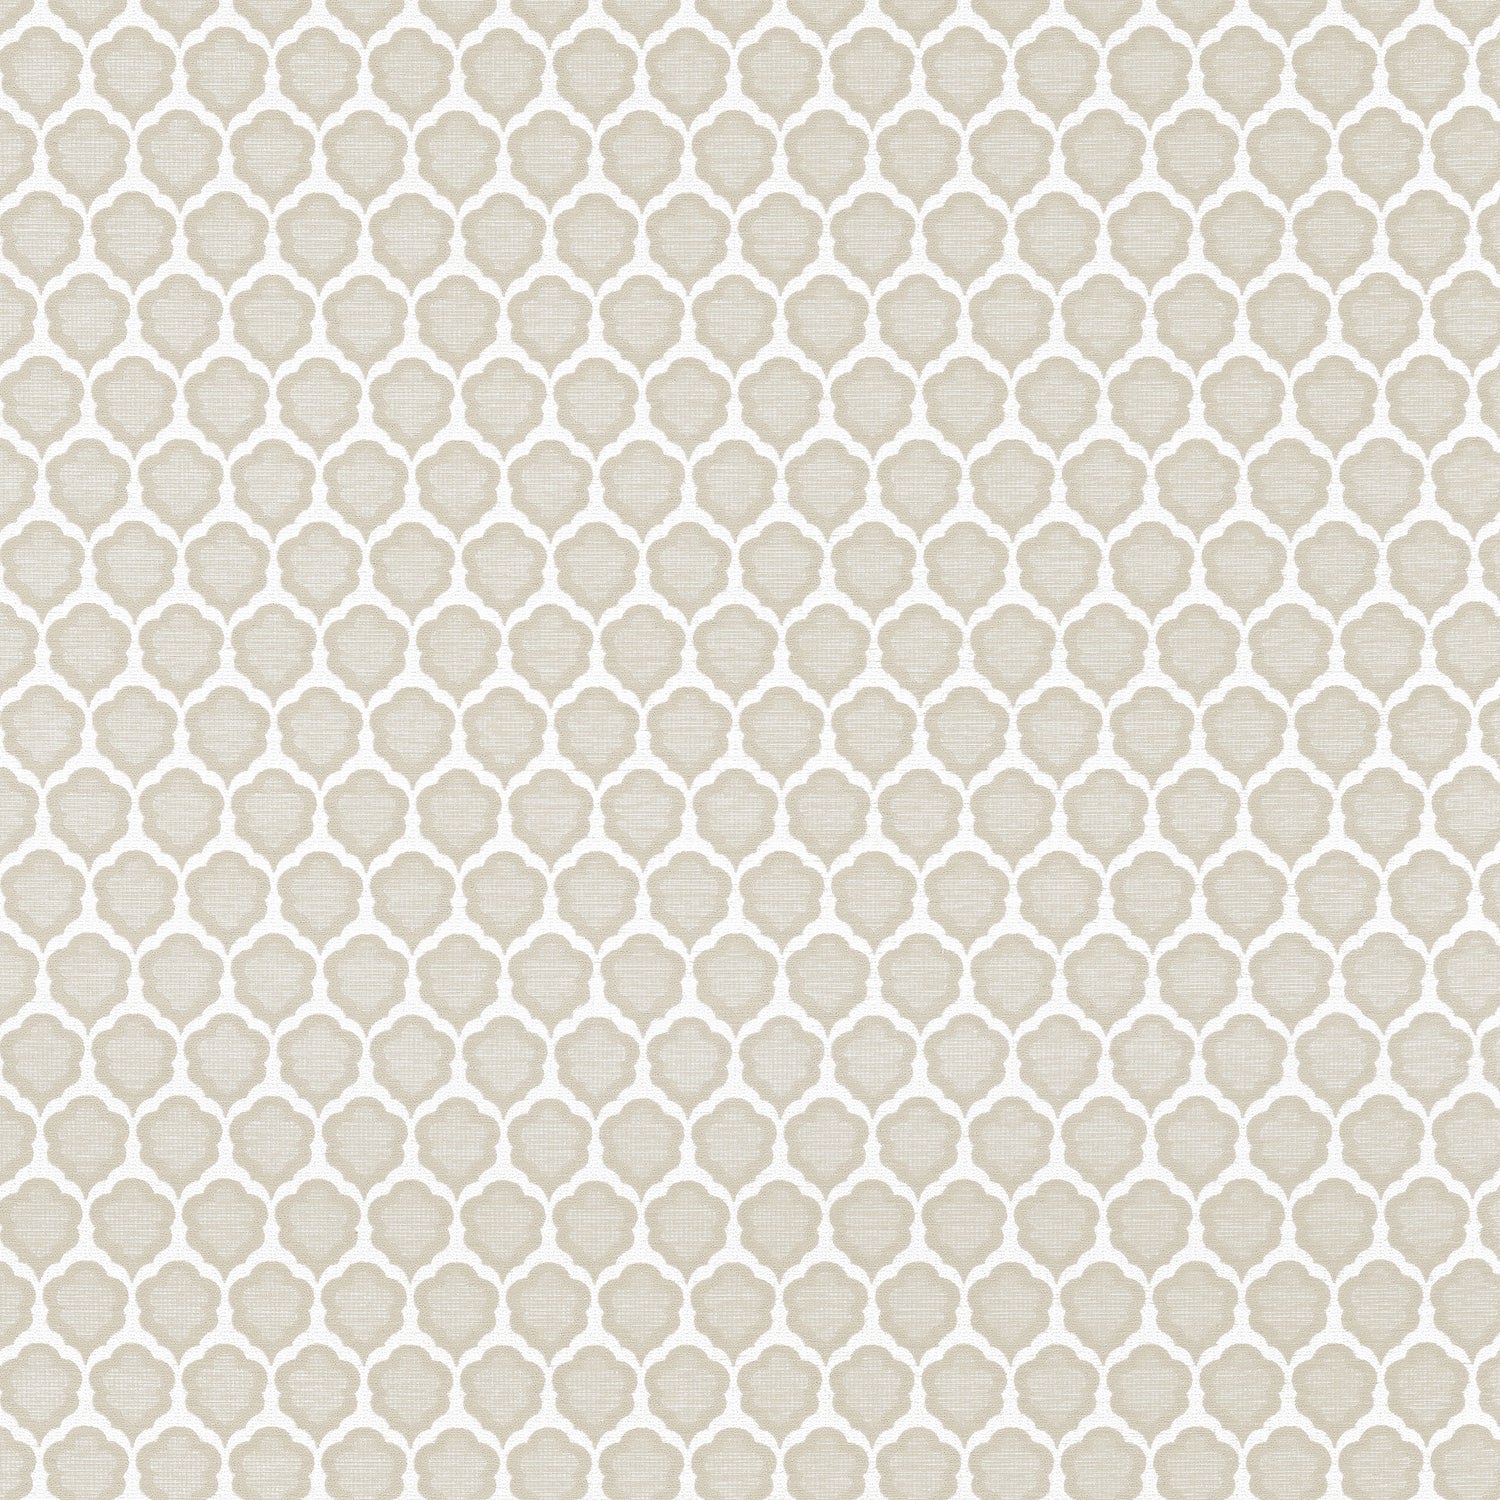 Genie fabric in bisque color - pattern number W81927 - by Thibaut in the Companions collection